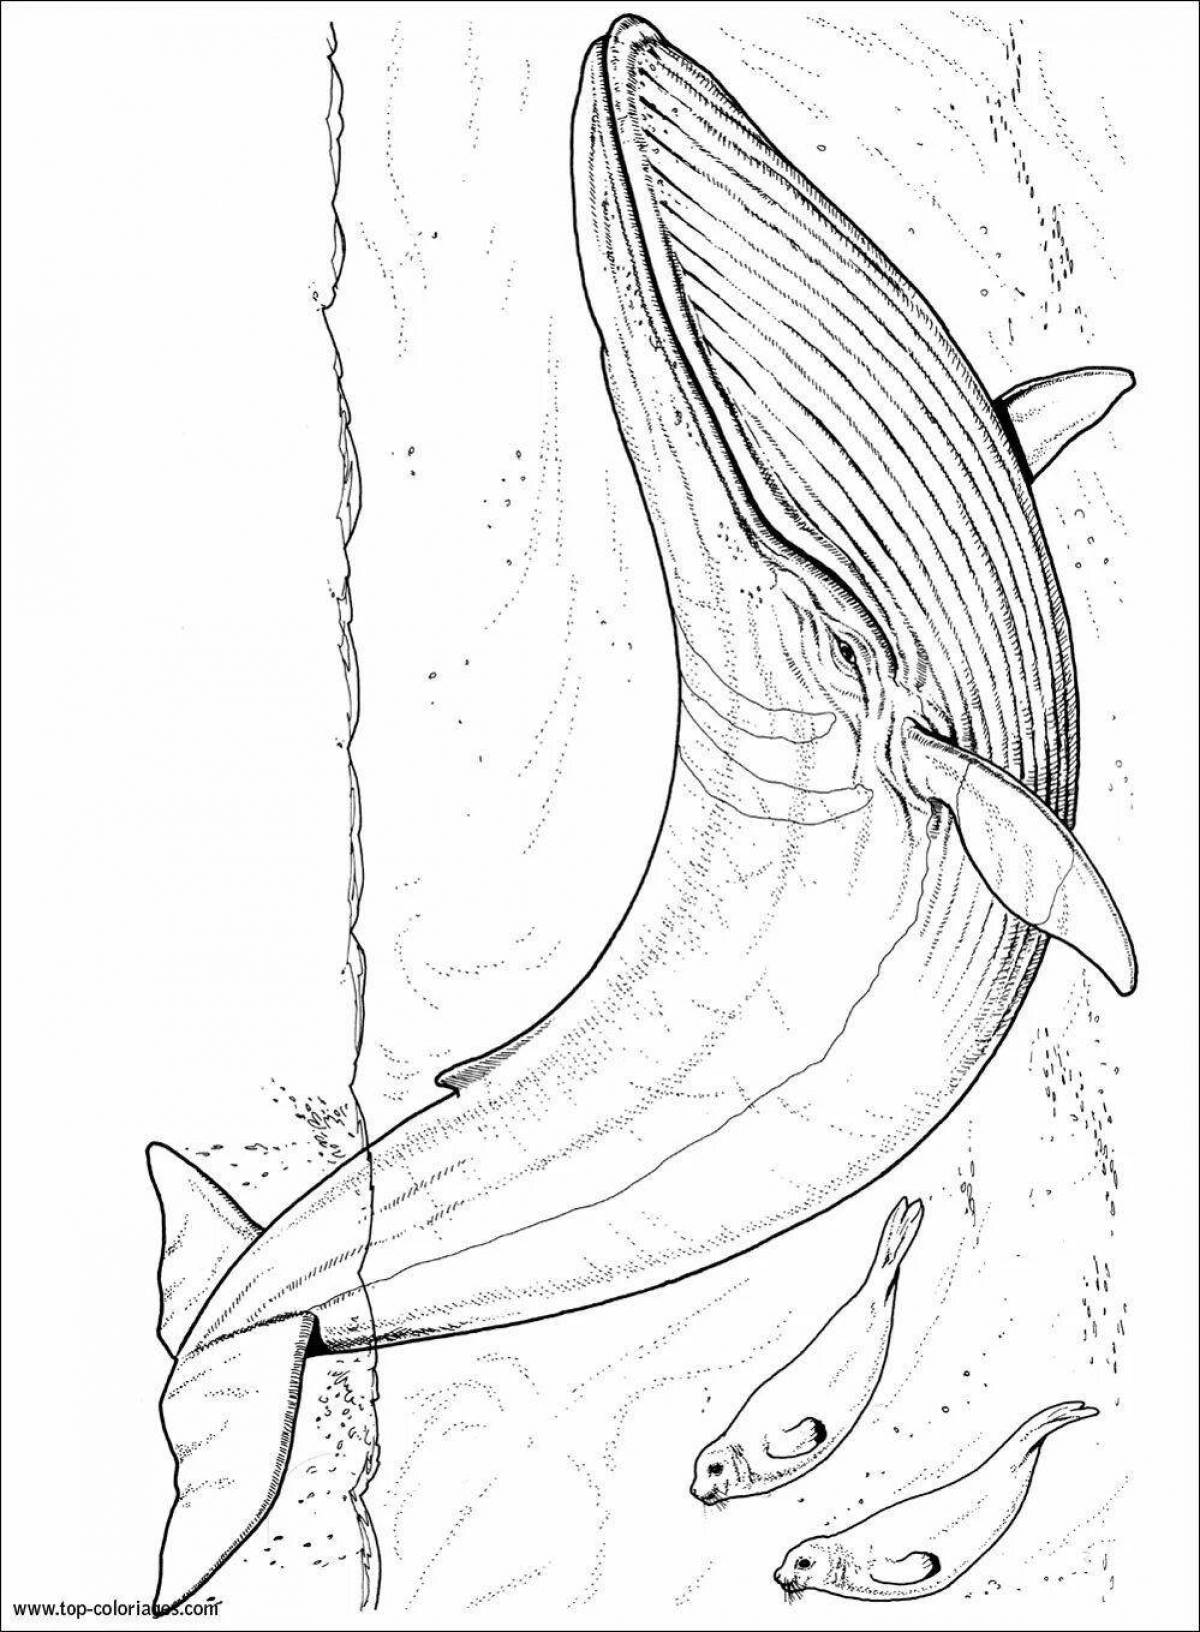 Sweet three whales in music coloring book